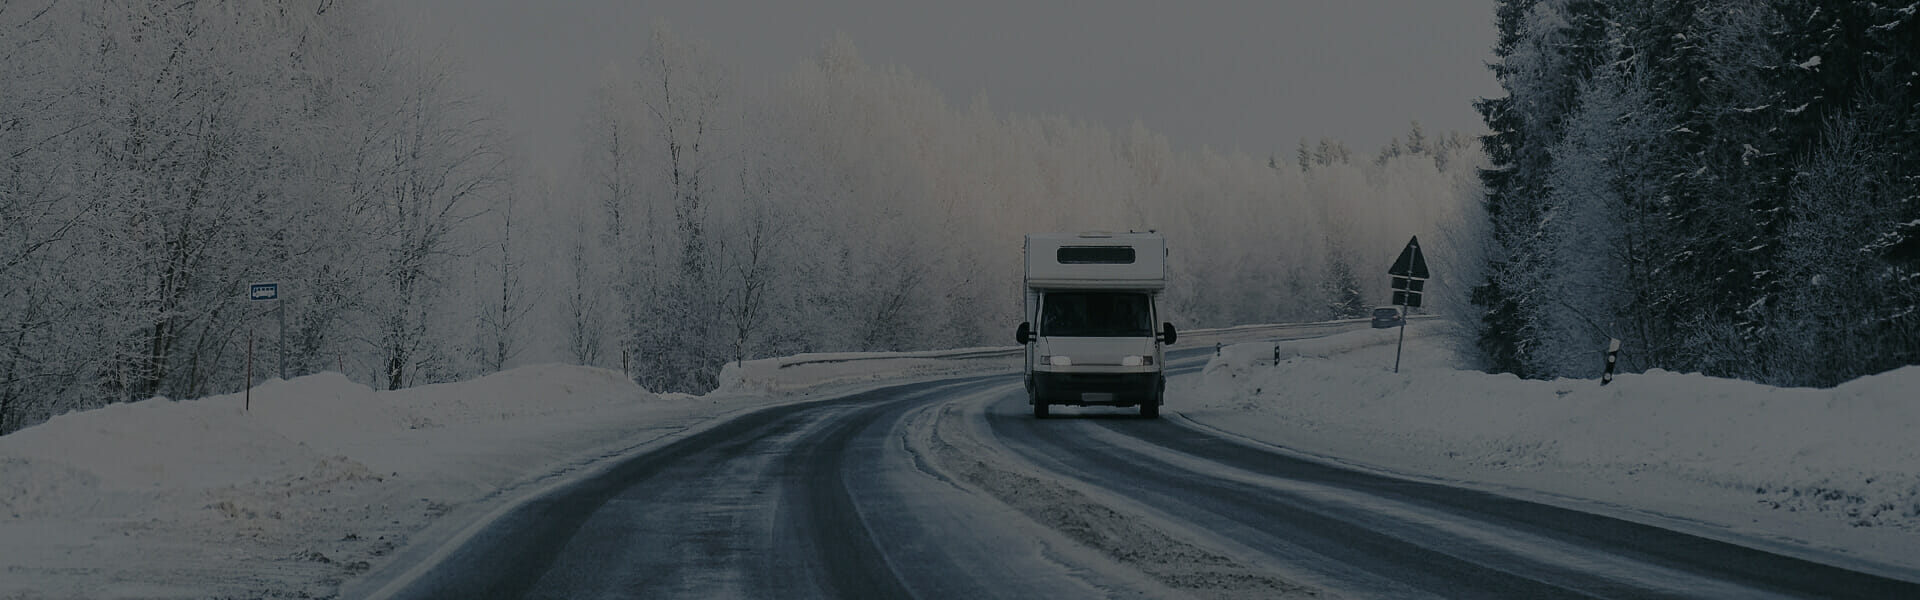 How to Dewinterize Your RV or Motorhome